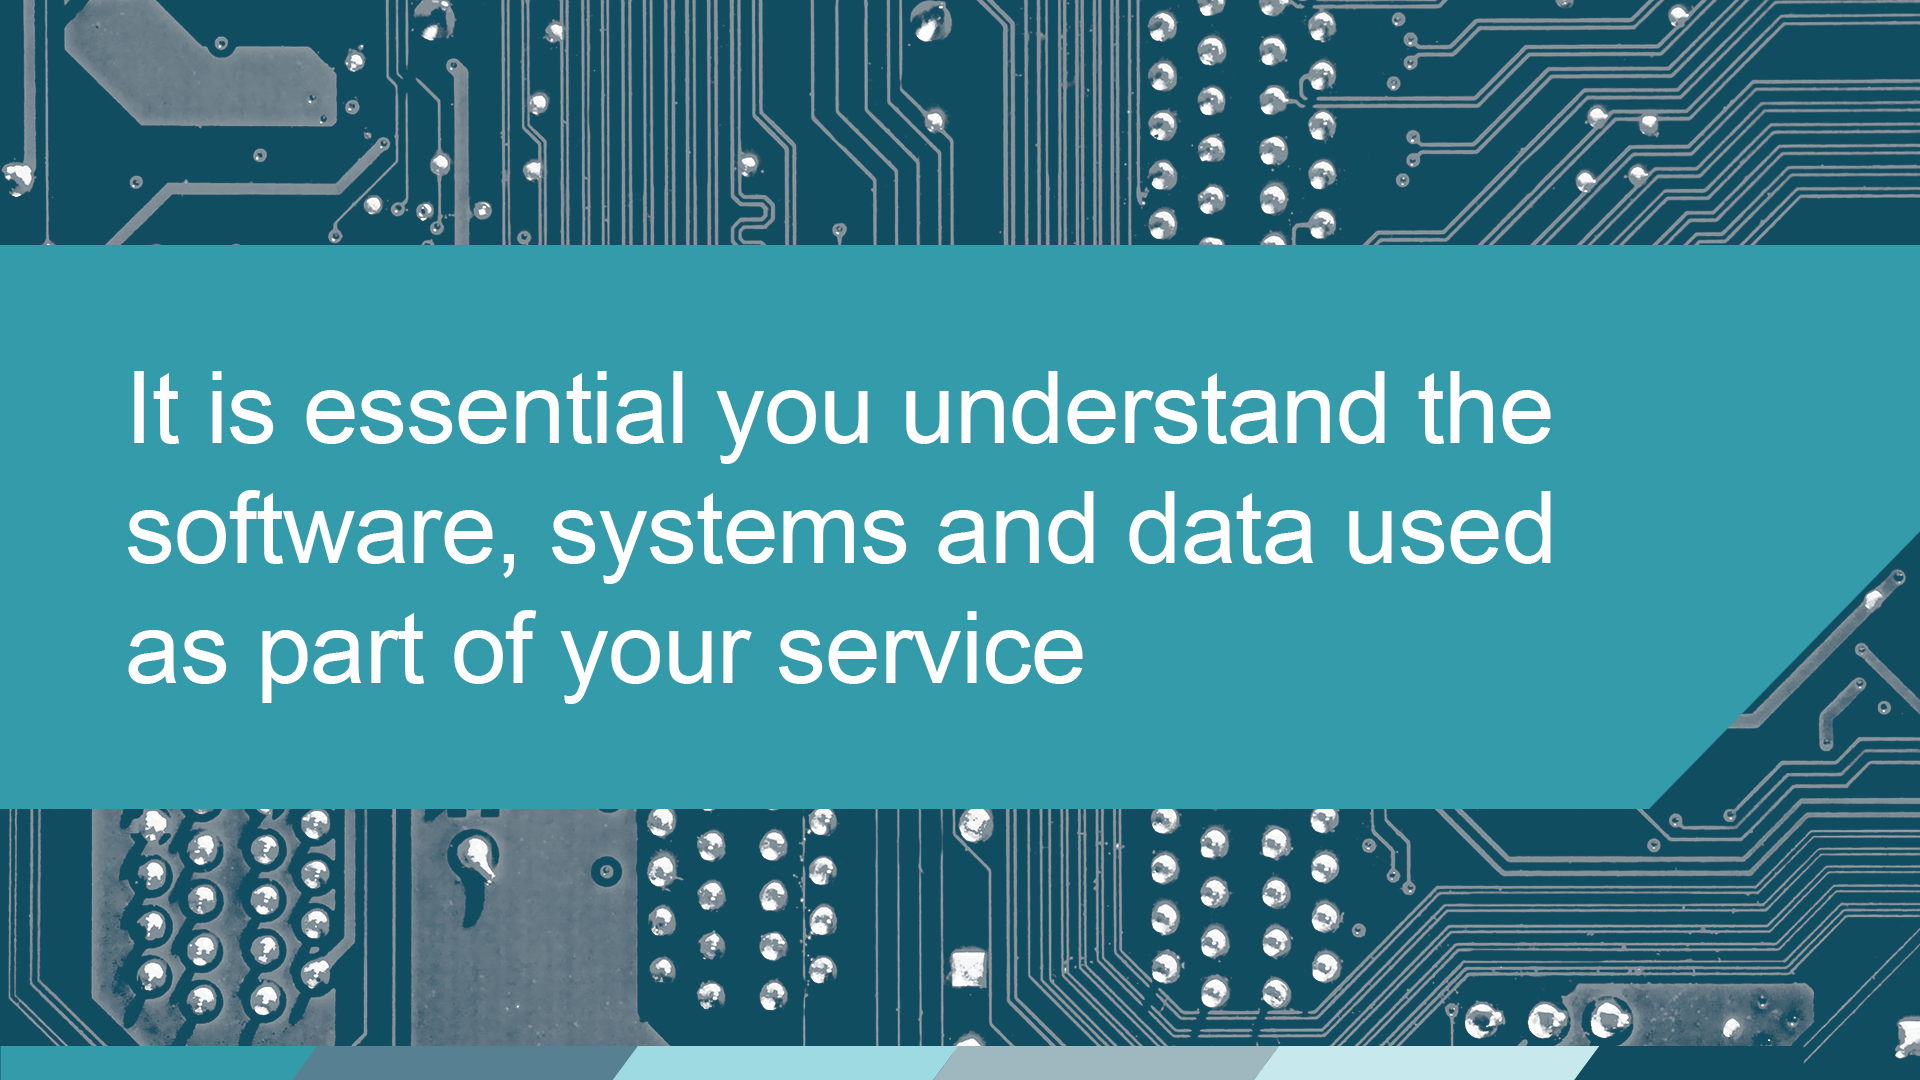  It is essential you understand the software, systems and data used as part of your service